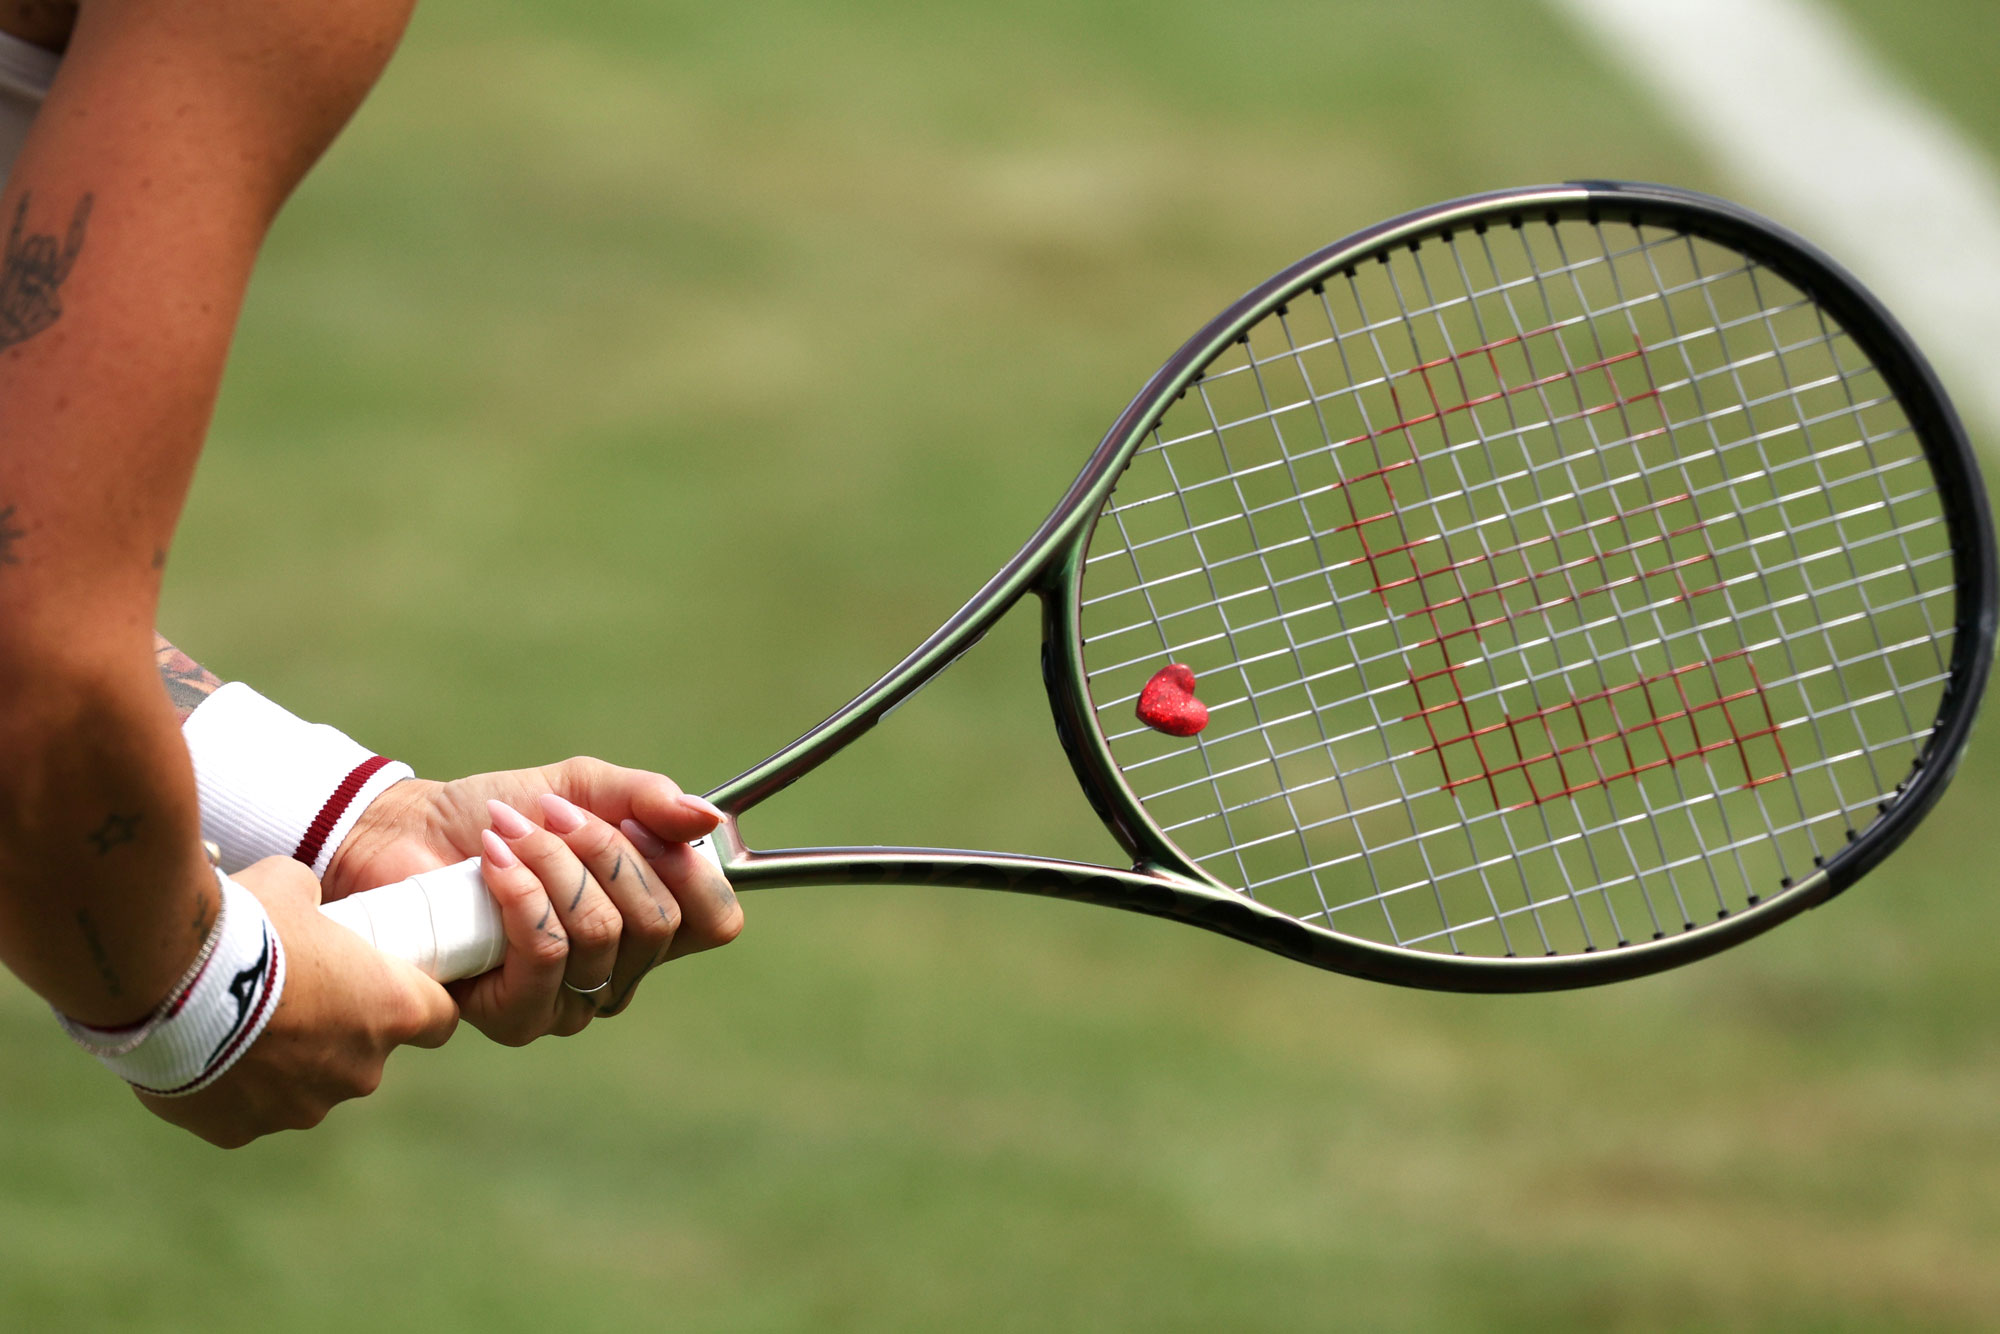 Wilson Tennis Racket Maker Amer Sports Files for US IPO